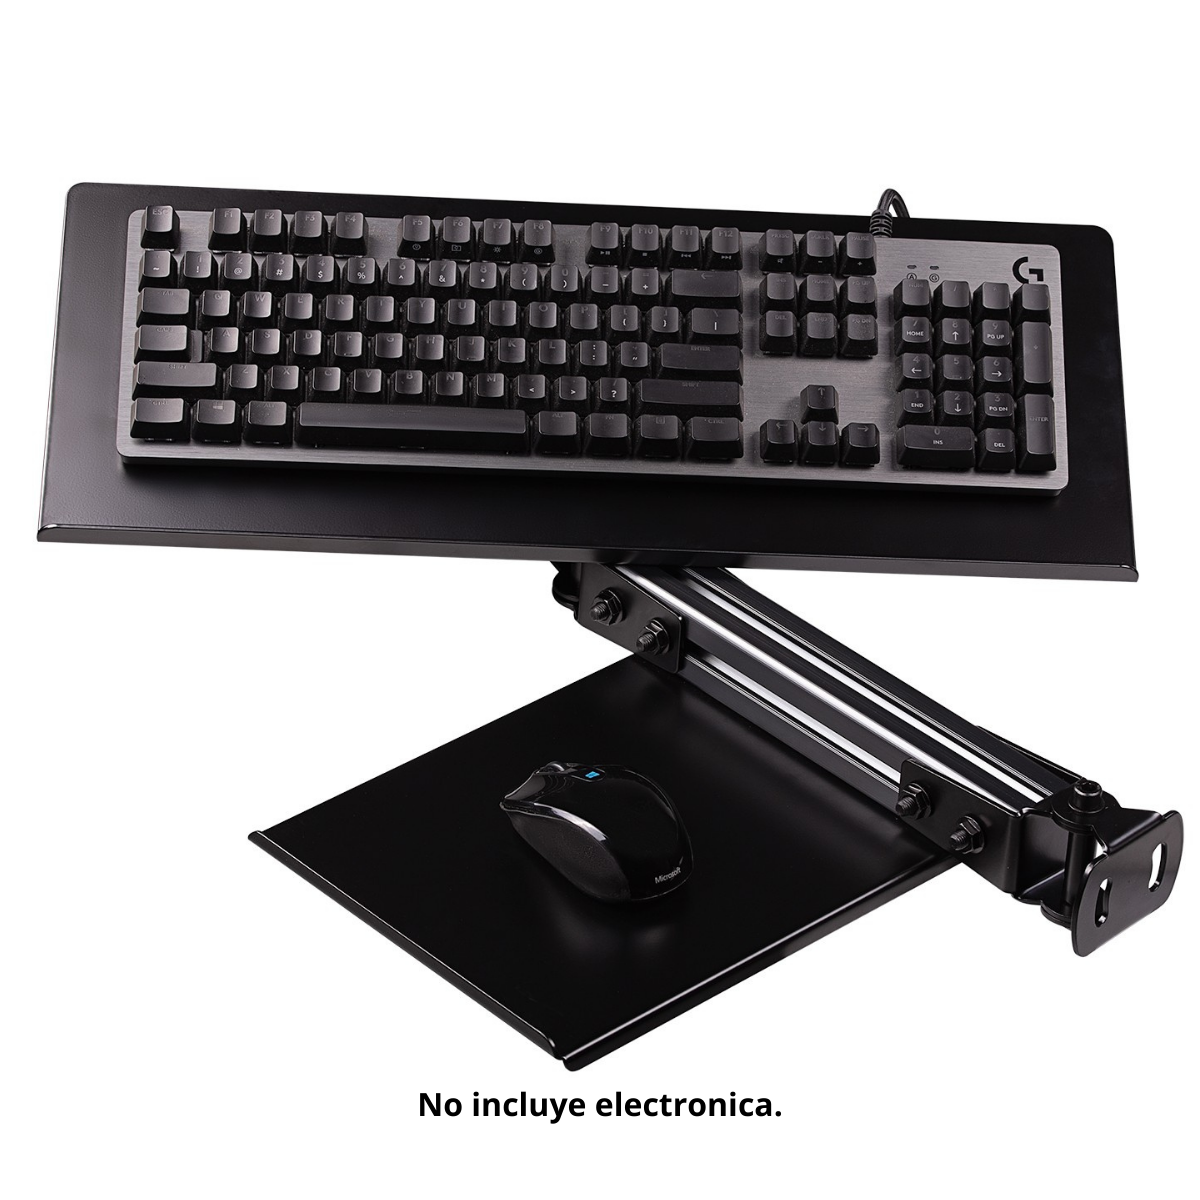 ELITE MOUSE TRAY RACING & NEXT KEYBOARD NLR-E010 LEVEL